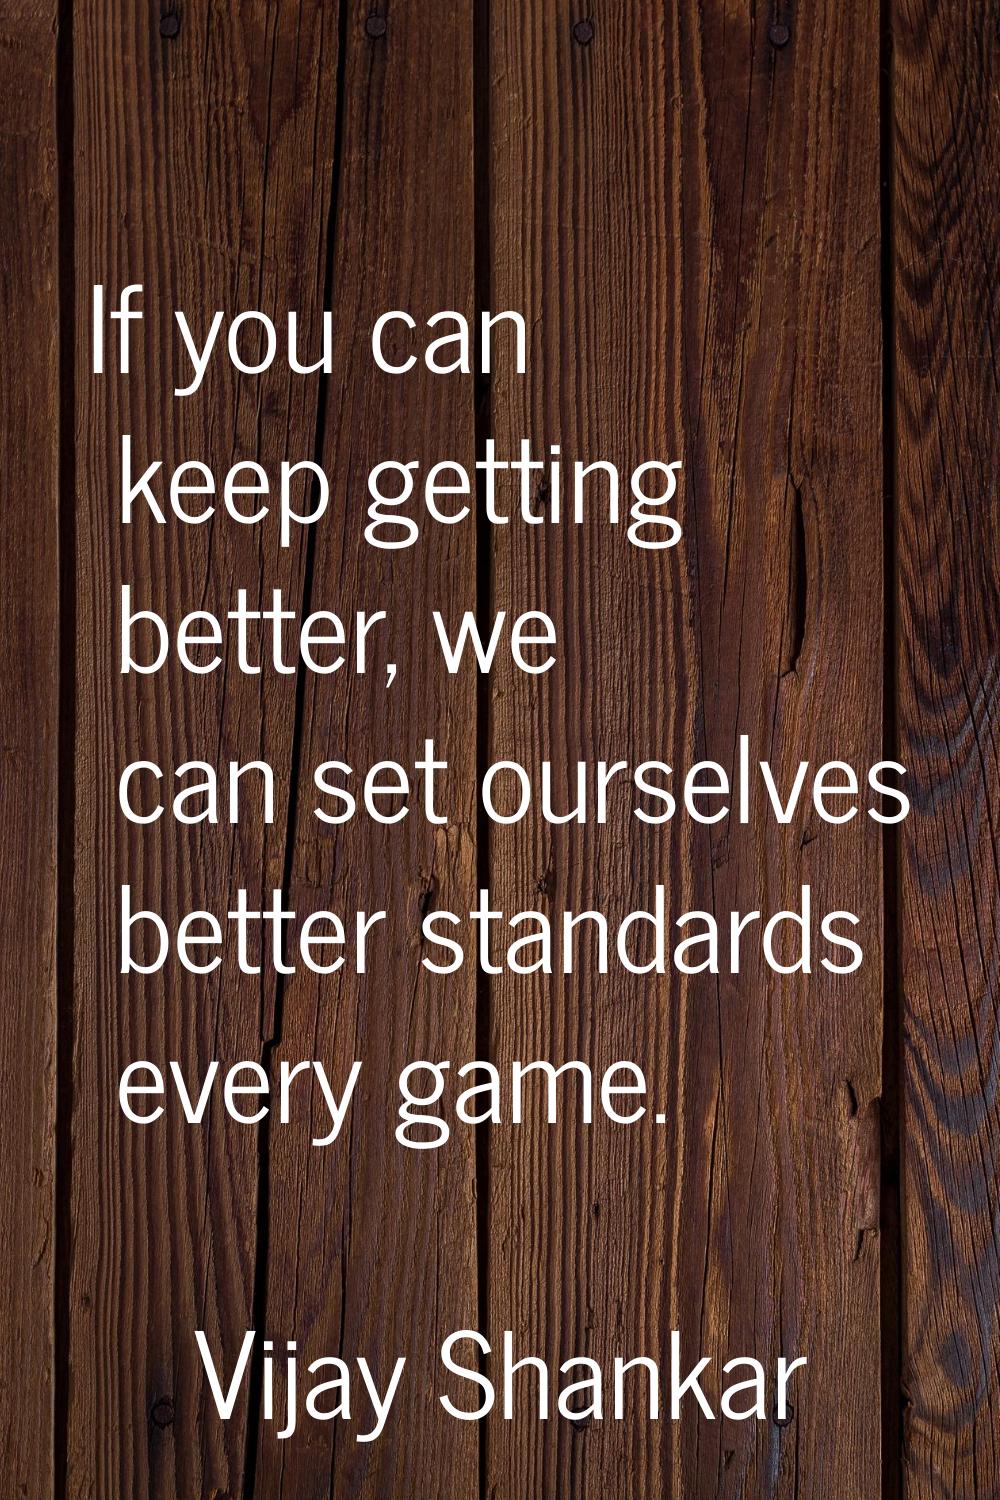 If you can keep getting better, we can set ourselves better standards every game.